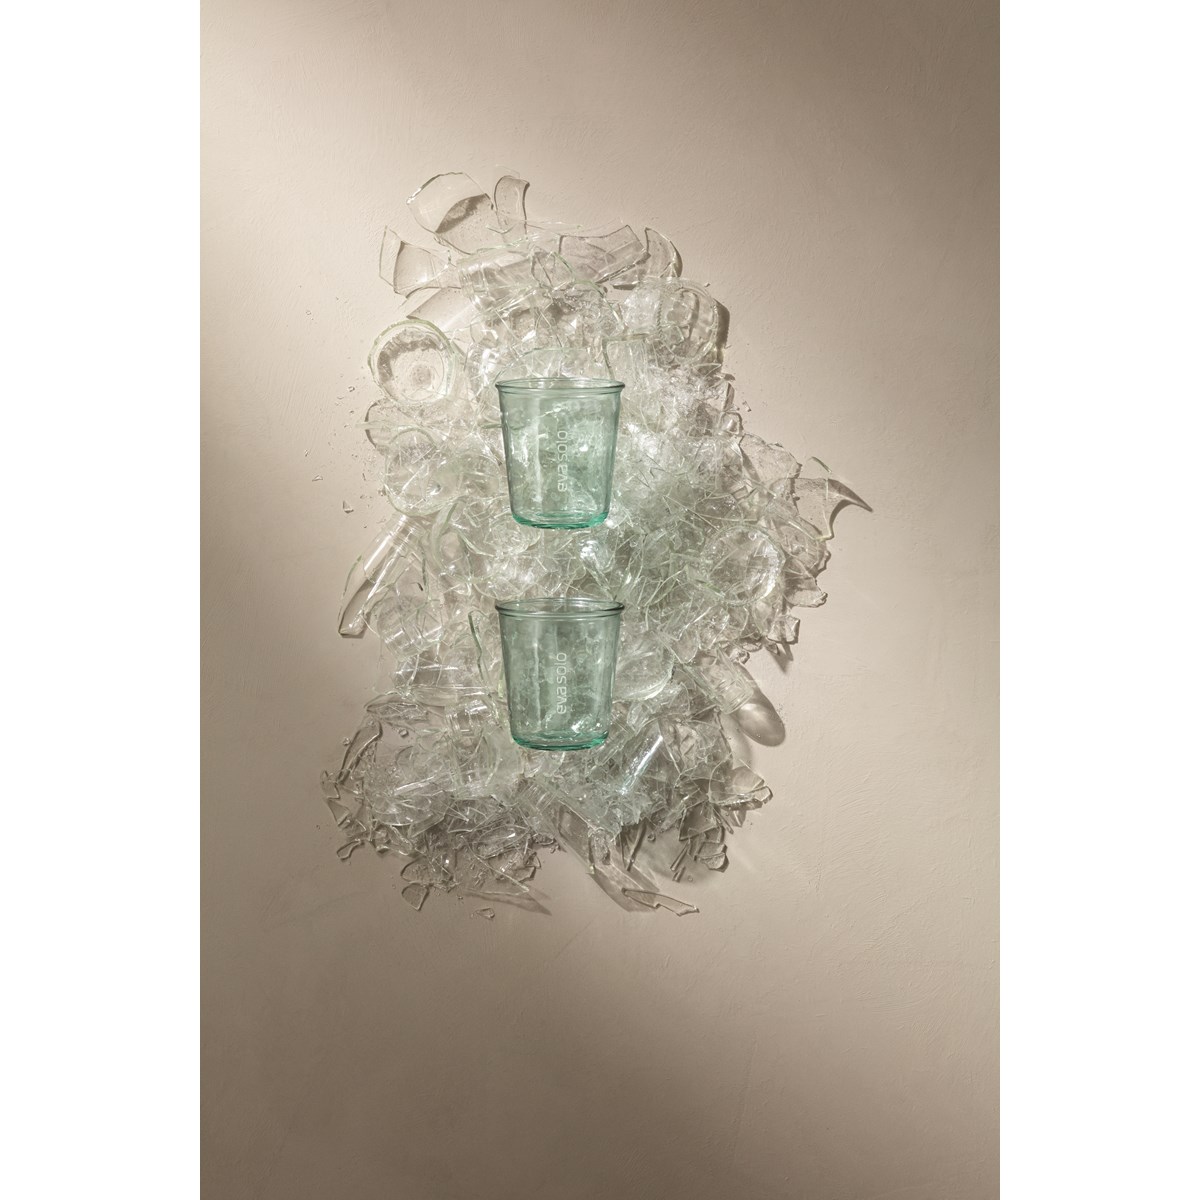 Eva Solo, 4 Recycled drikkeglass 25cl